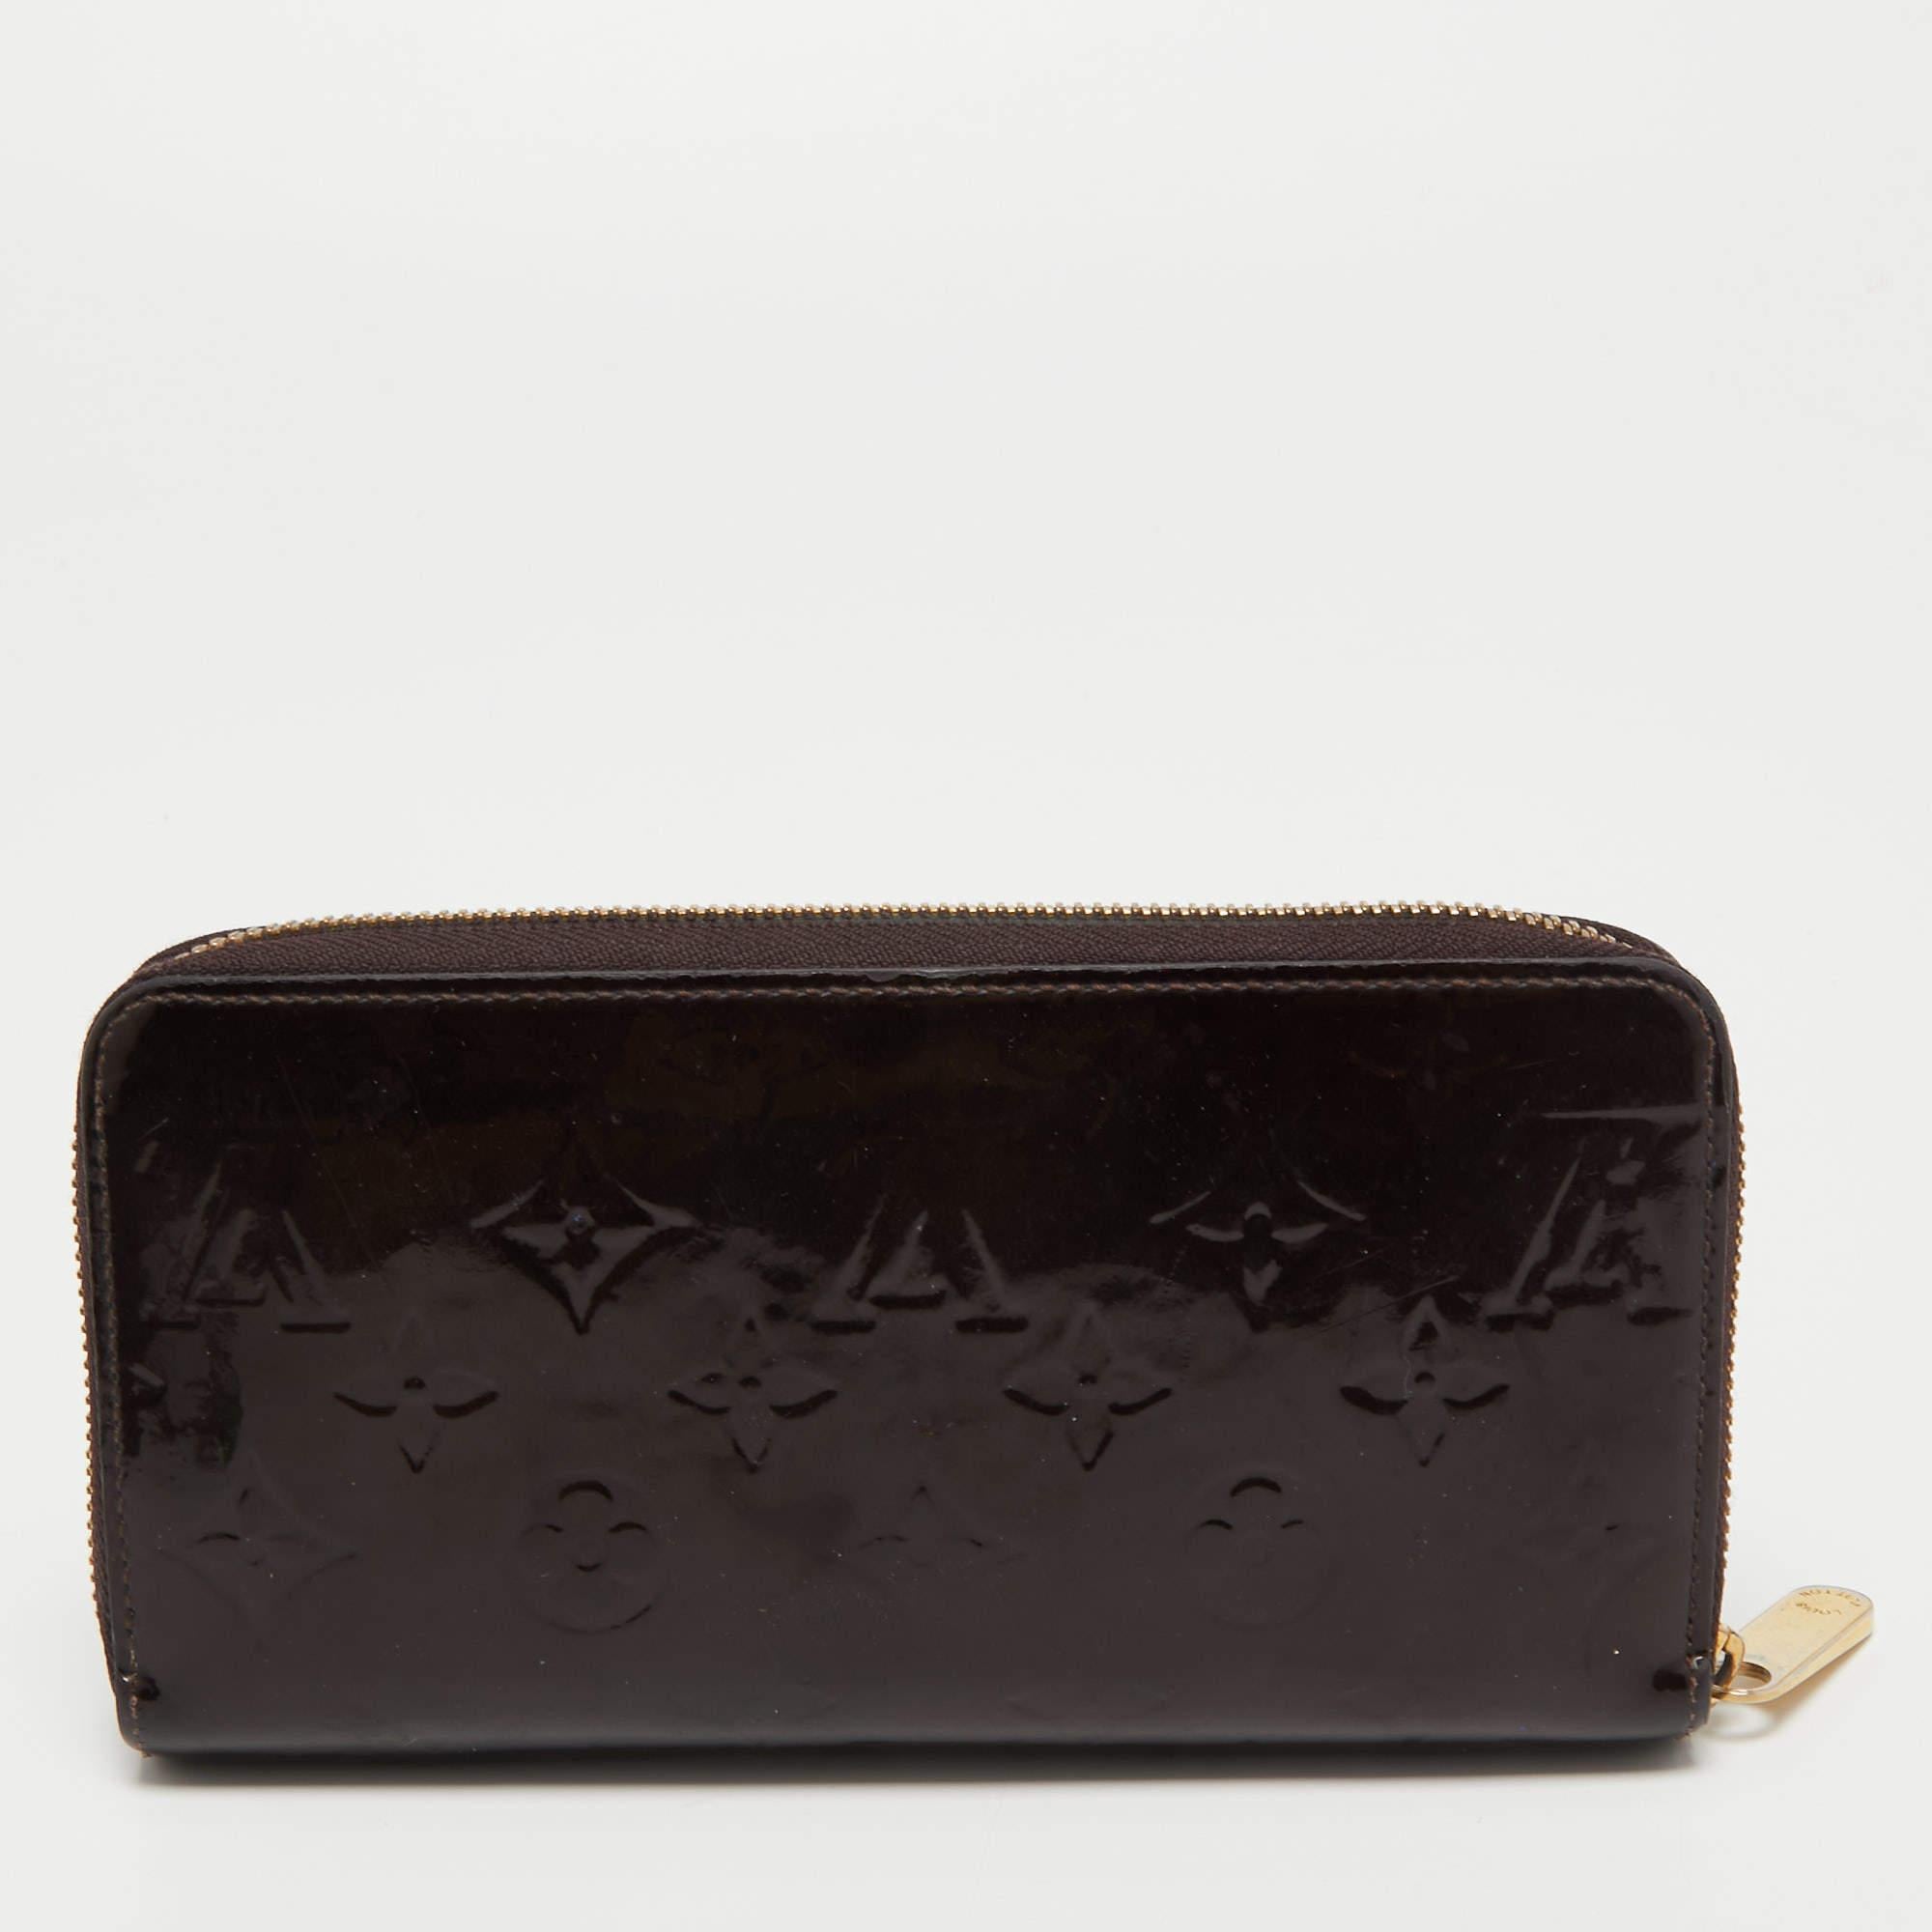 With a rich heritage and meticulous workmanship, each creation of Louis Vuitton is sure to impress you with its notable features. This Zippy wallet is conveniently designed for everyday use. Crafted from Amarante Monogram, it is paired with a